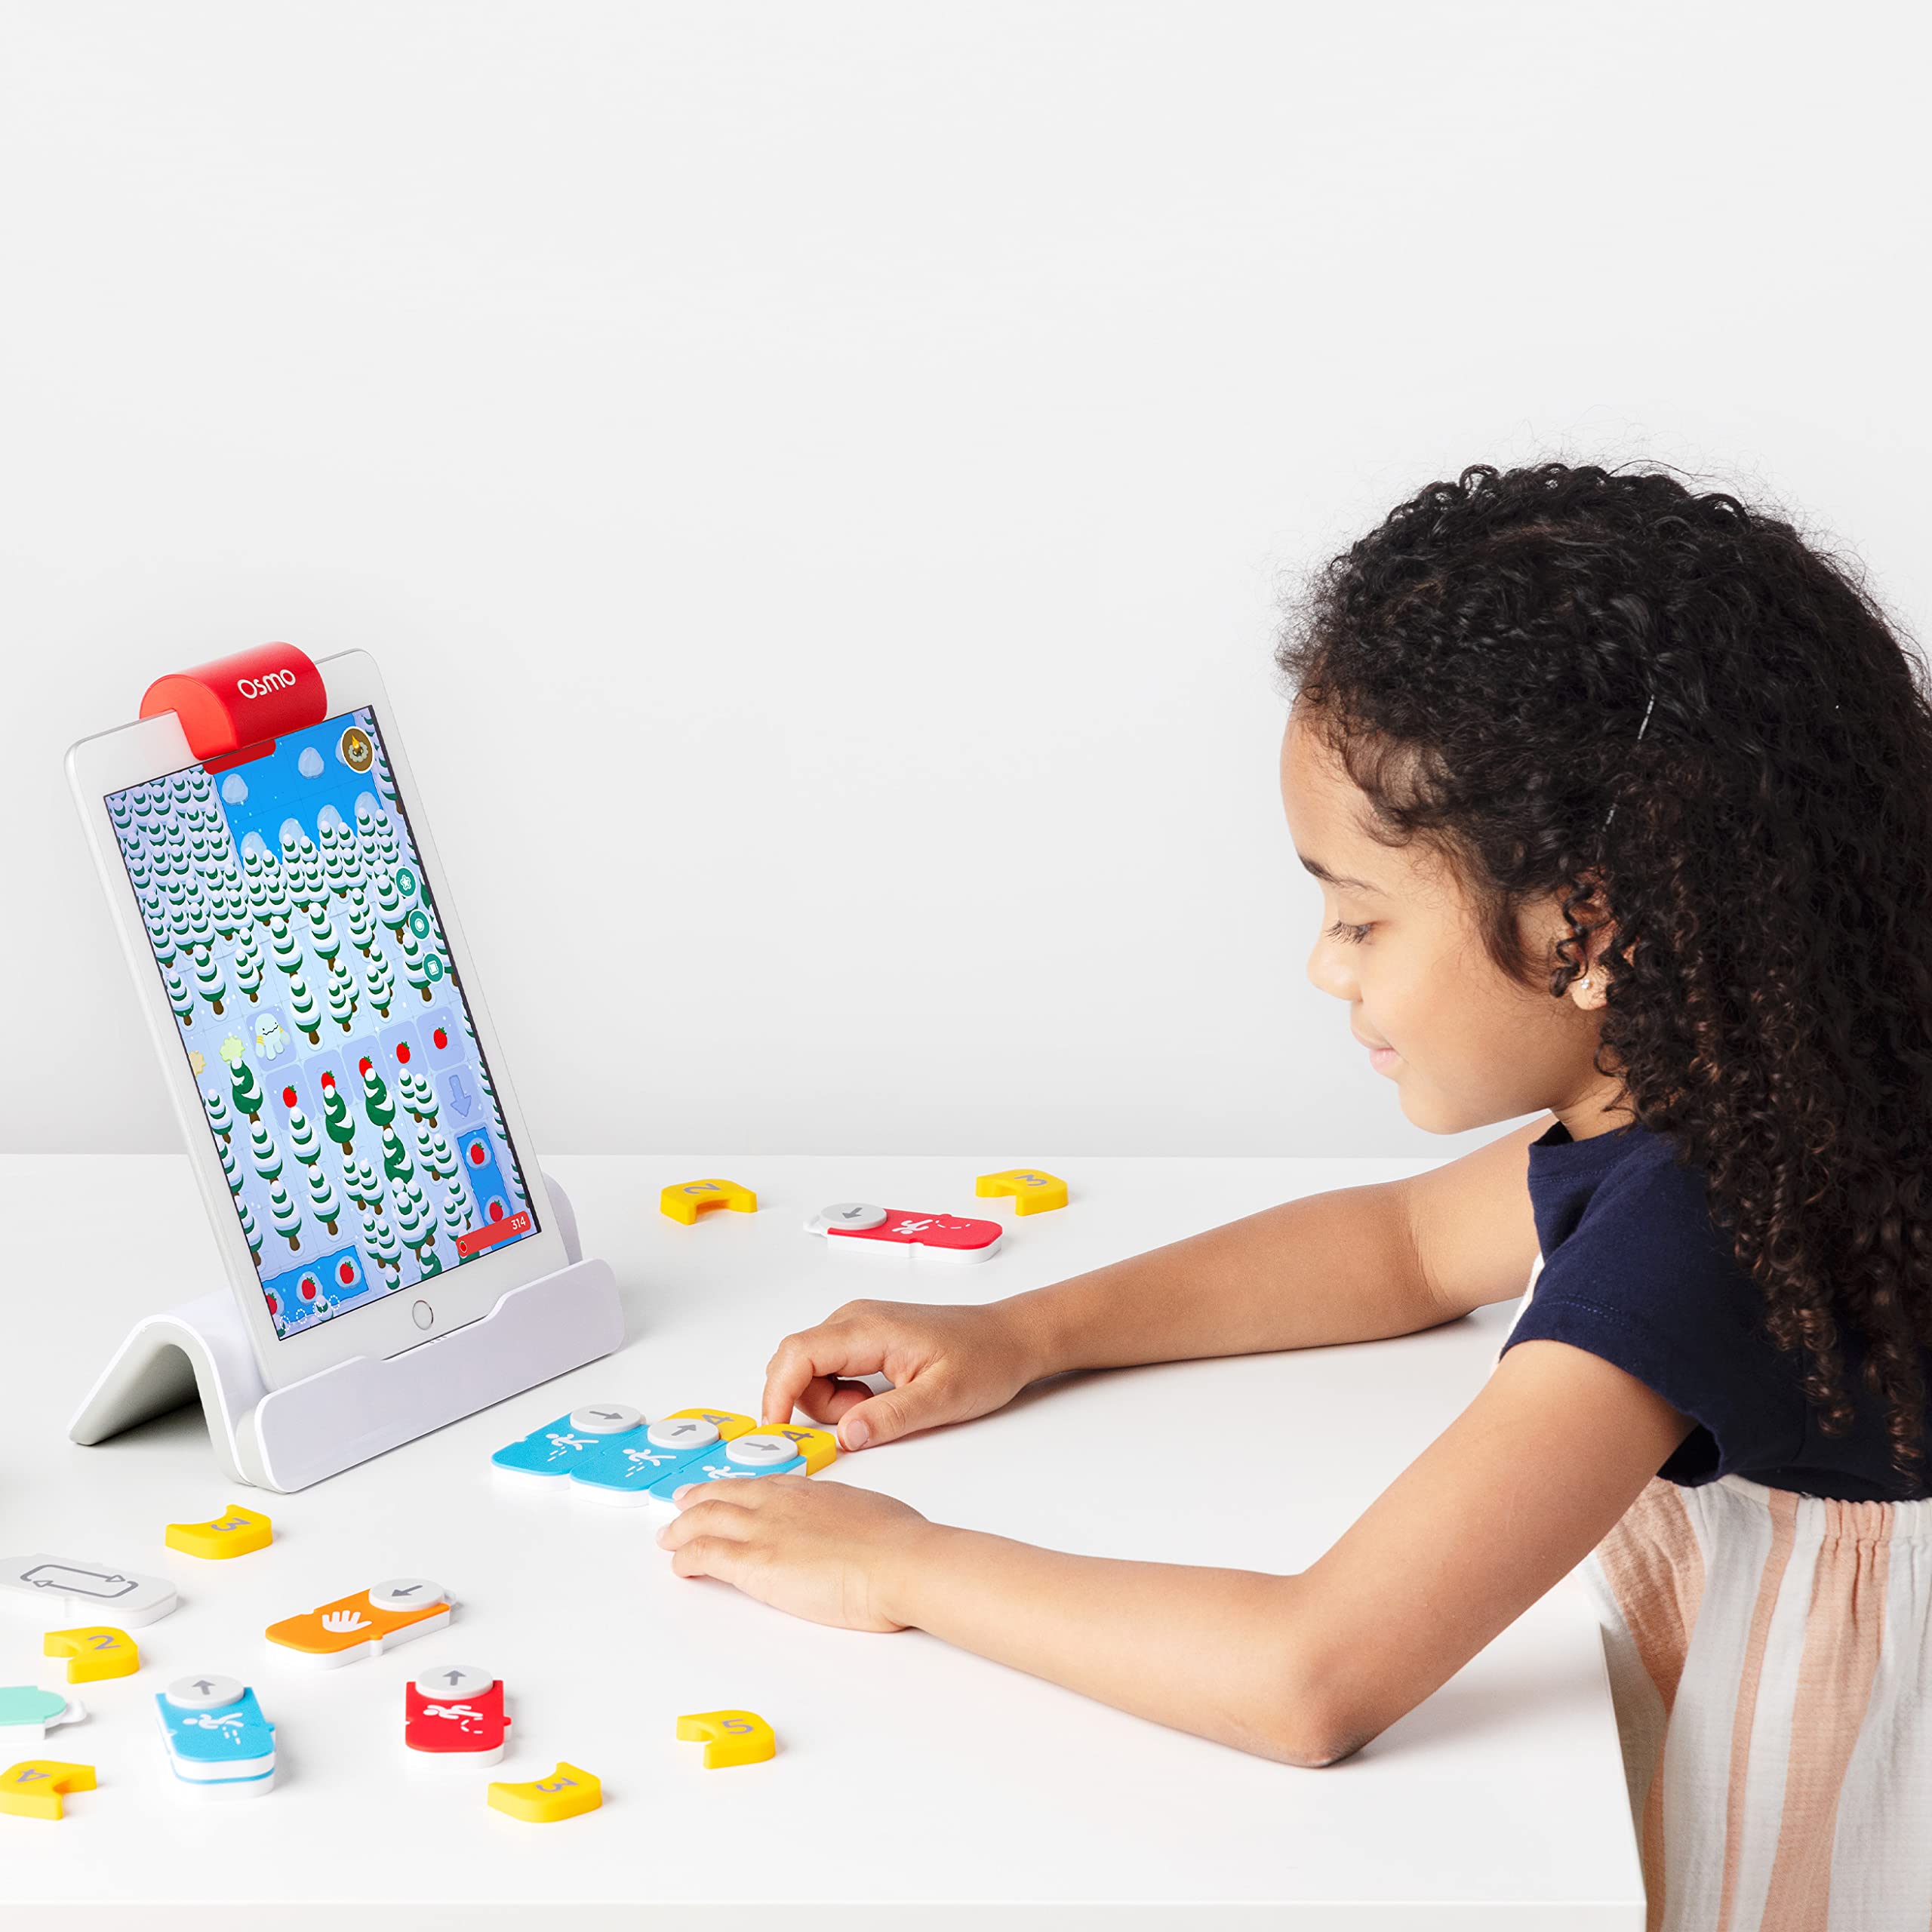 Osmo - Coding Starter Kit for iPhone & iPad-3 Educational Learning Games-Ages 5-10+ - Learn to Code, Coding Basics & Coding Puzzles-STEM Toy-Logic, Coding Fundamentals(Osmo iPad/iPhone Base Included)